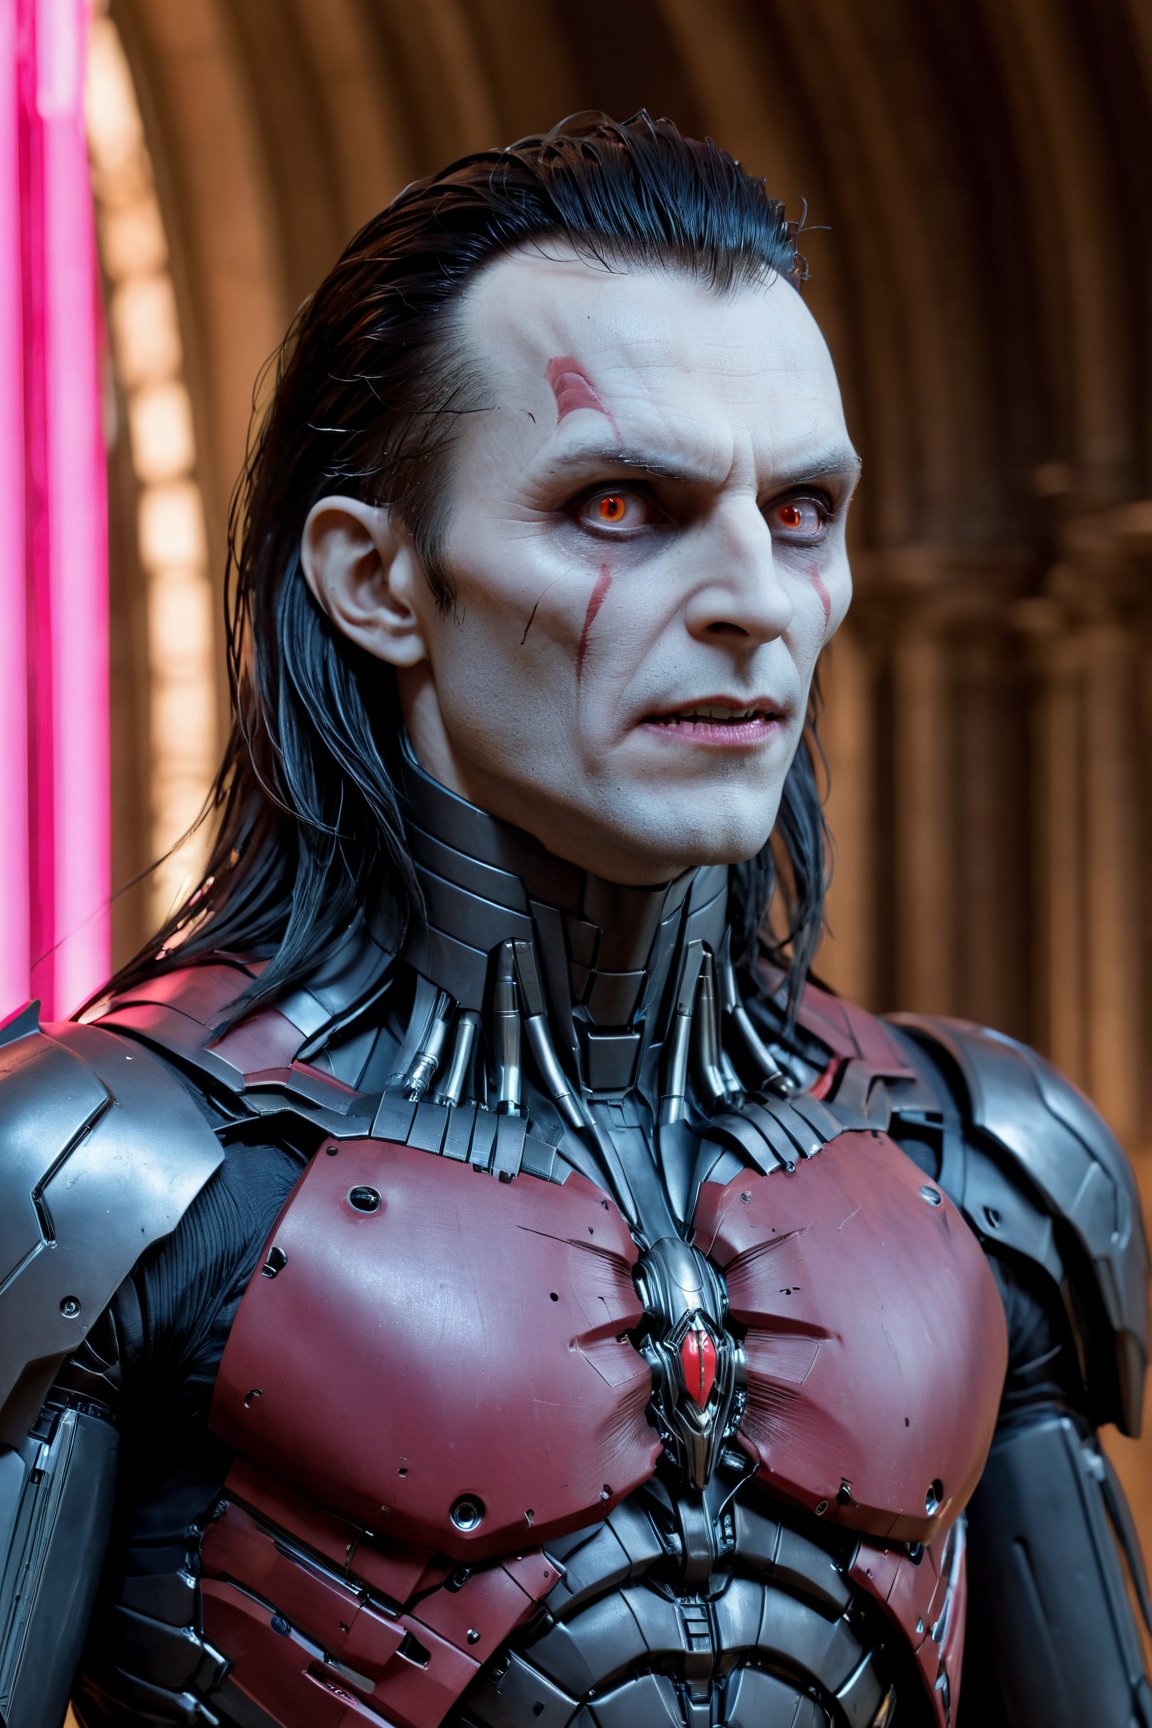 (Morbius from Marvel,  portrayed with hyper-realistic perfection and Joker-style hair),  (Biomechanical robot in a cyberpunk cathedral),  This award-winning photo,  featured on Zbrush Central,  captures Morbius in a hyper-realistic portrayal with a distinct Joker-style hairdo. The intricate biomechanical details,  extremely sharp lines,  and the presence of a cybernetic limb complement the cyberpunk atmosphere of a gothic brutalist cathedral illuminated by neon lights.,<lora:EMS-74104-EMS:0.800000>